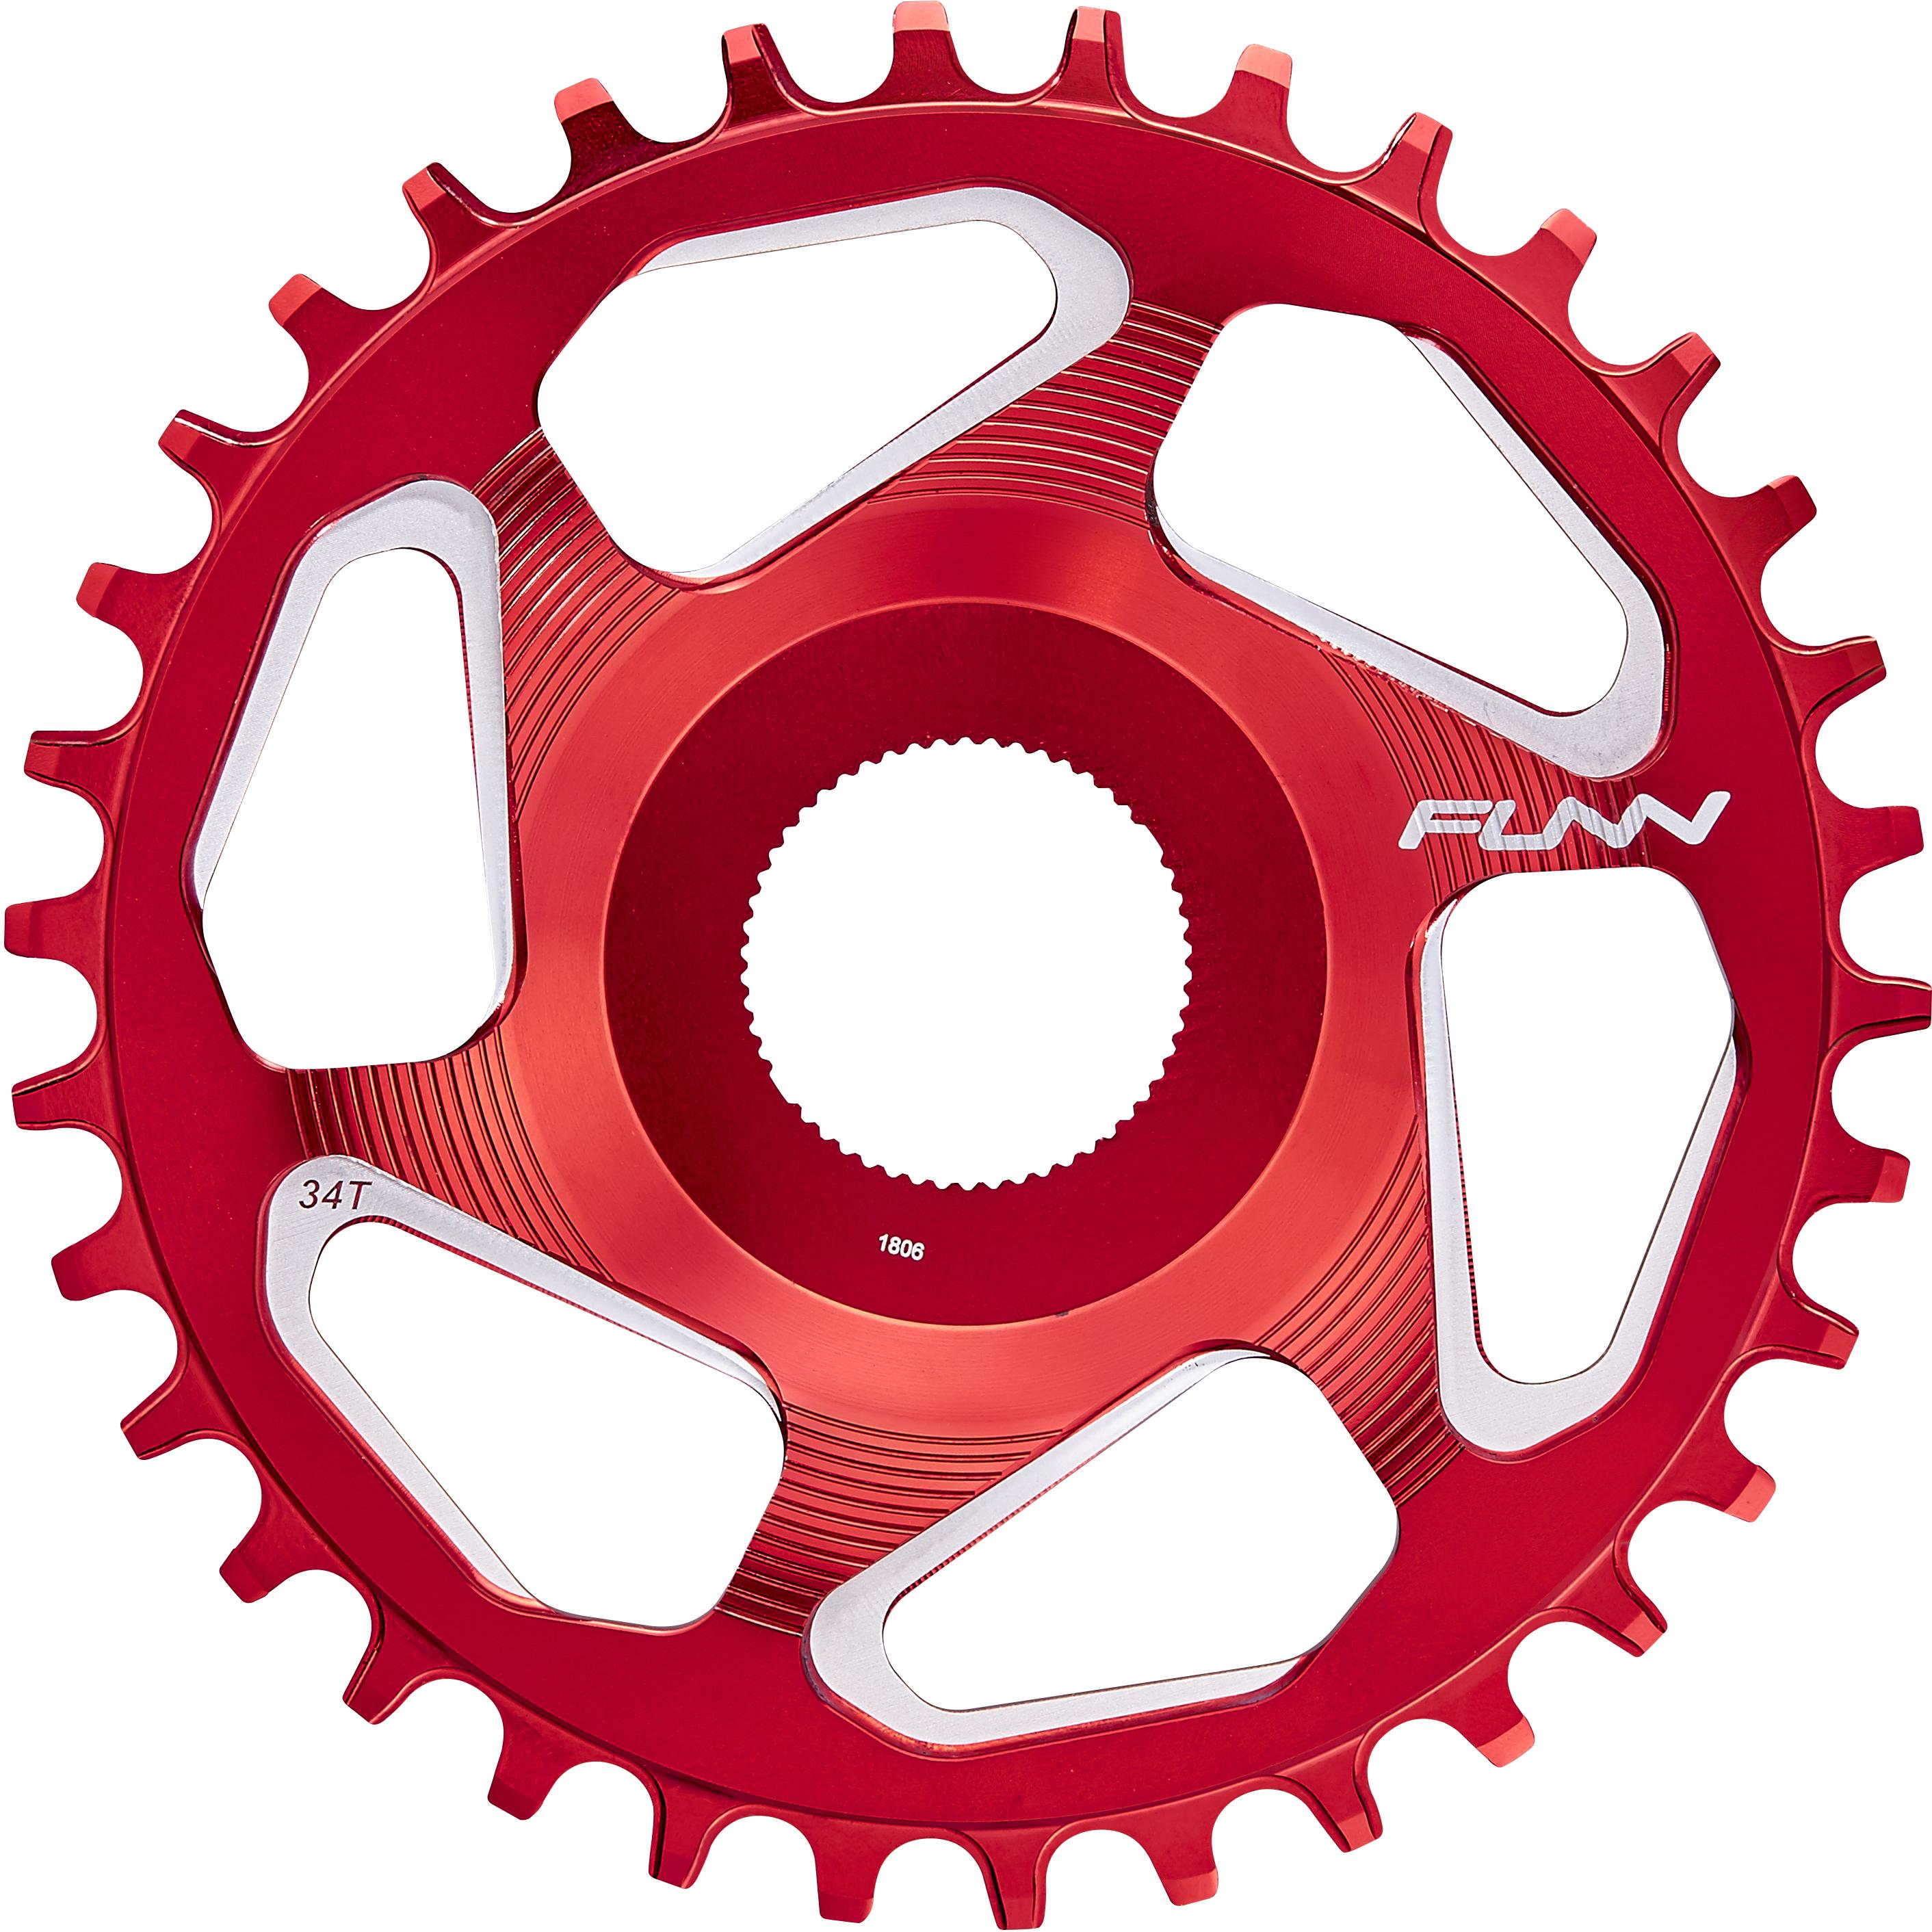 Funn Solo Es Narrow Wide Chainring - Red